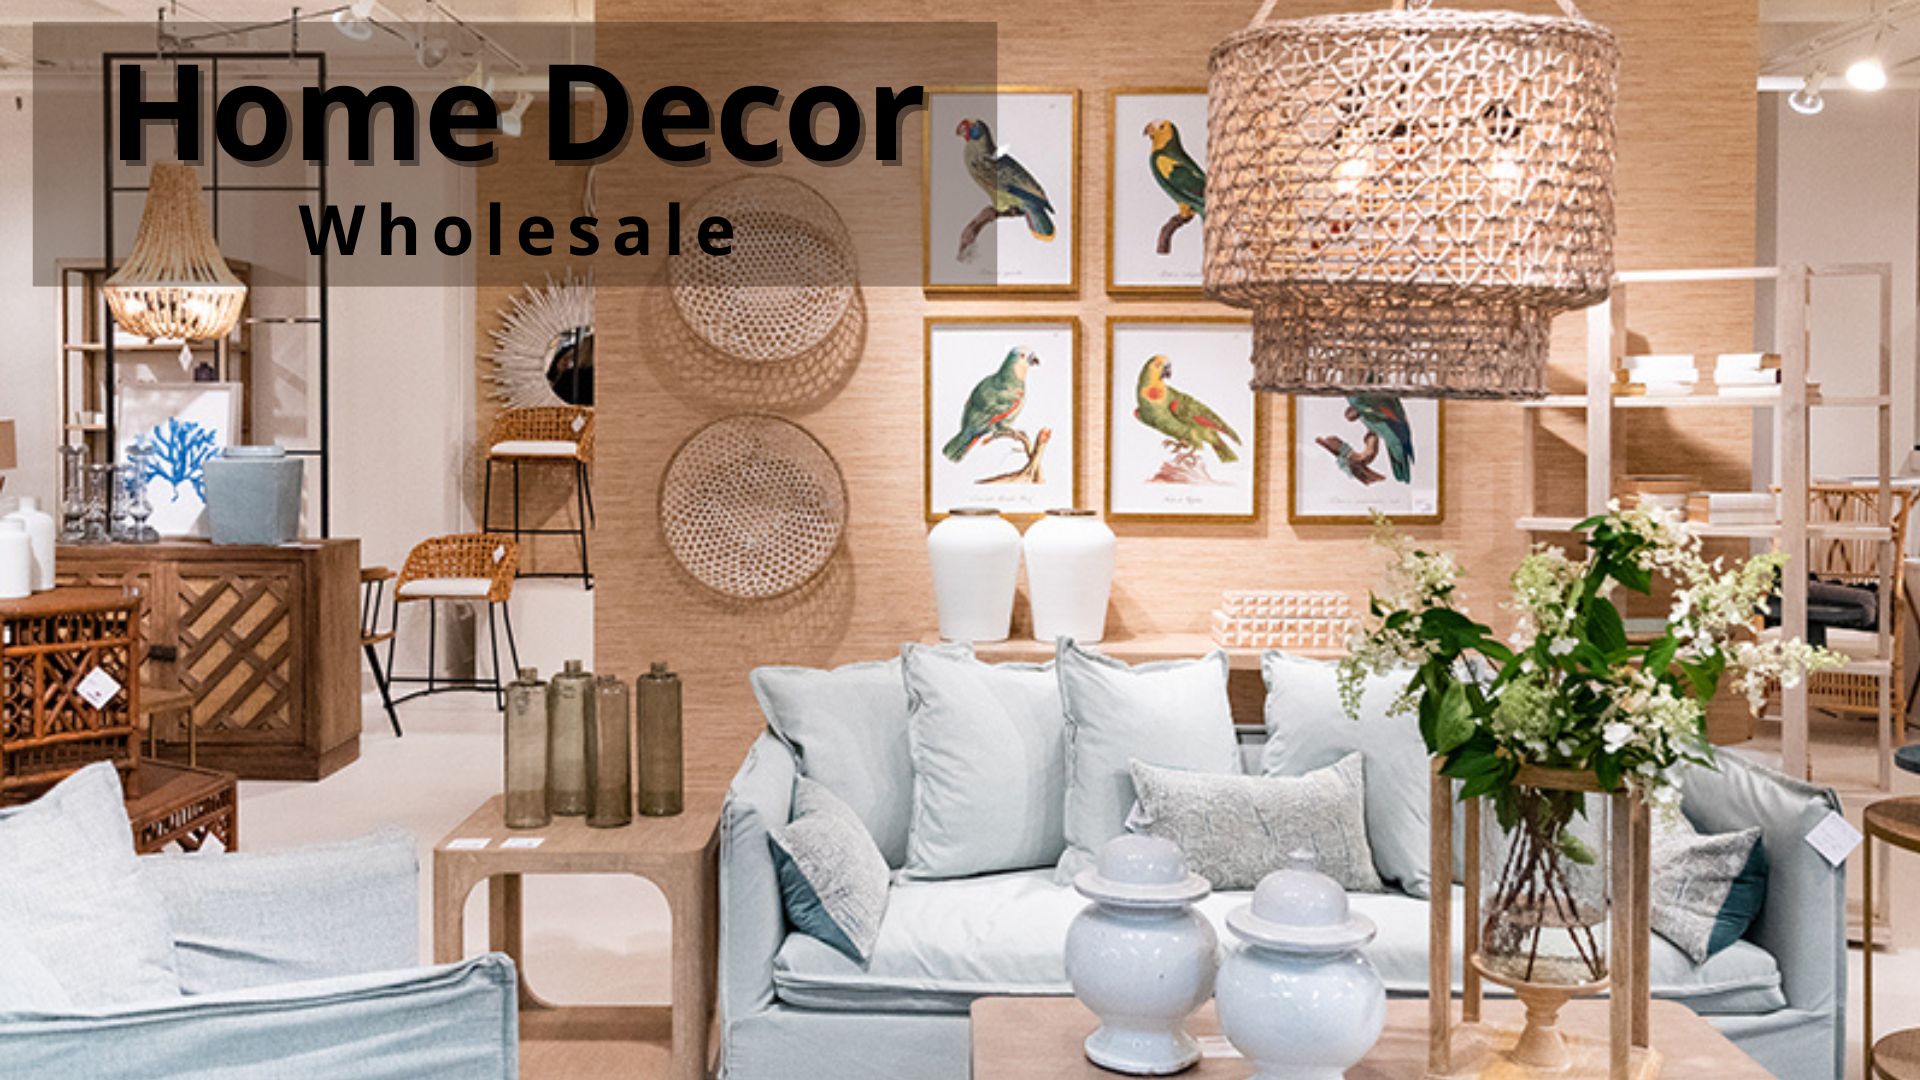 Choosing the Right Home Decor Wholesale Supplier